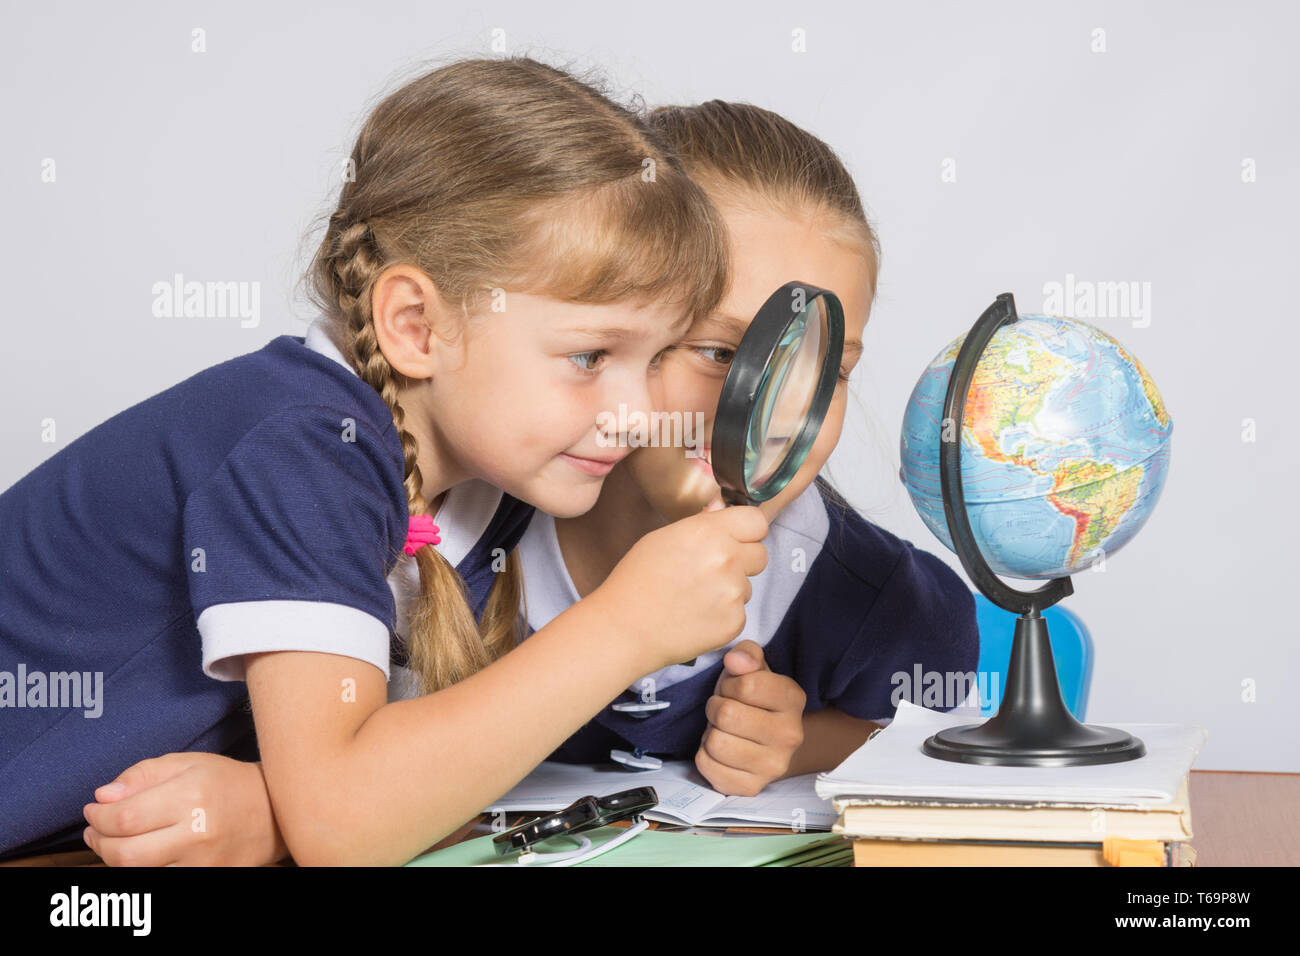 Two girls girlfriends looking at globe through a magnifying glass Stock Photo